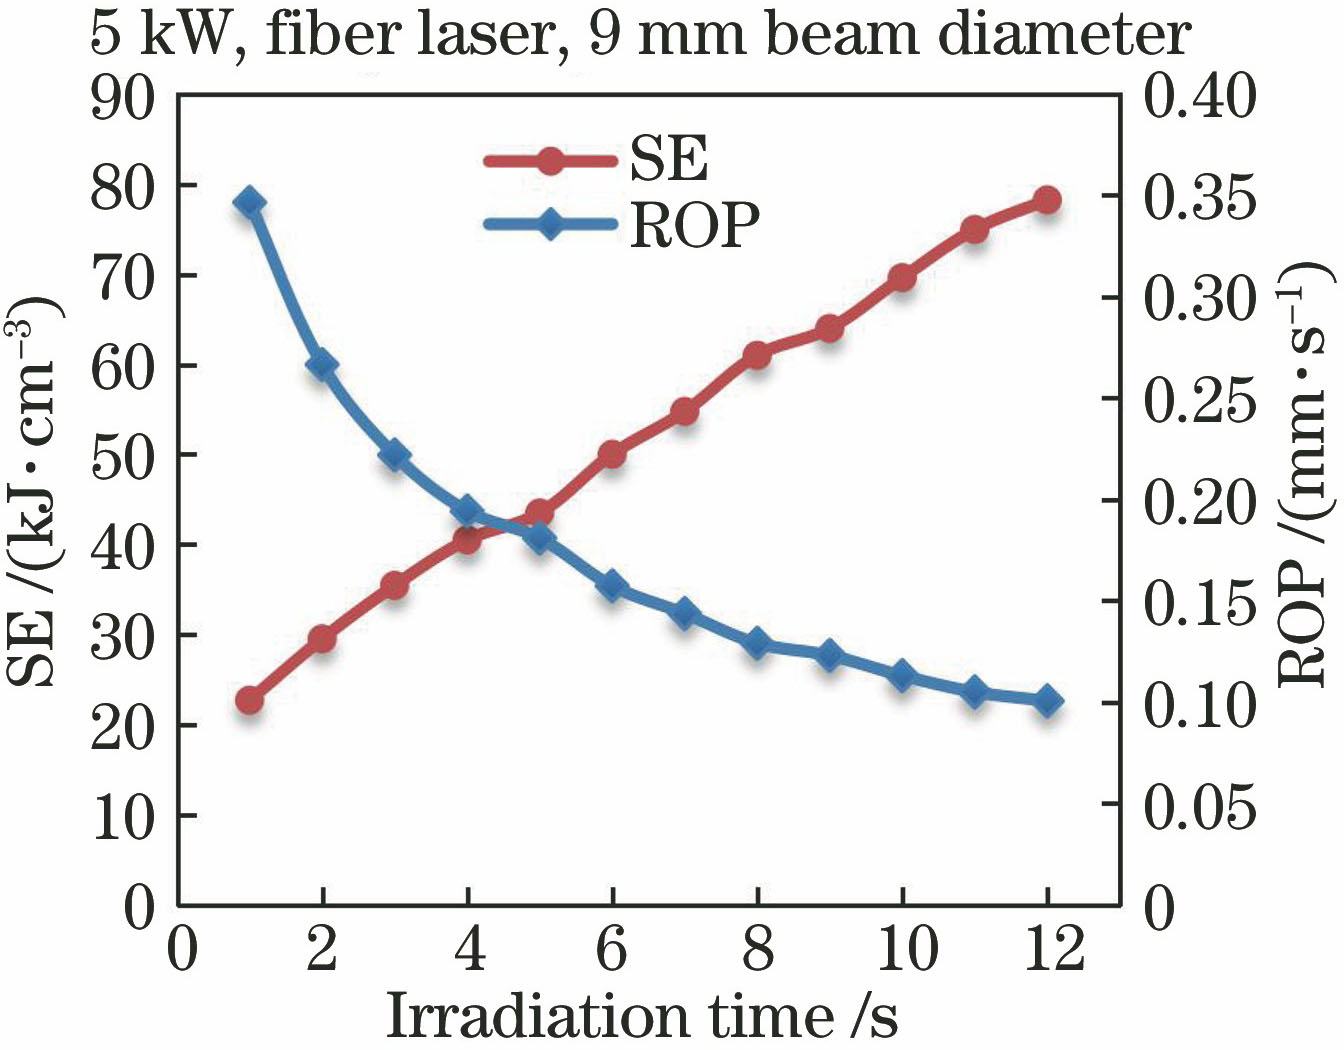 Effects of laser irradiation time on SE and ROP for limestone[29]